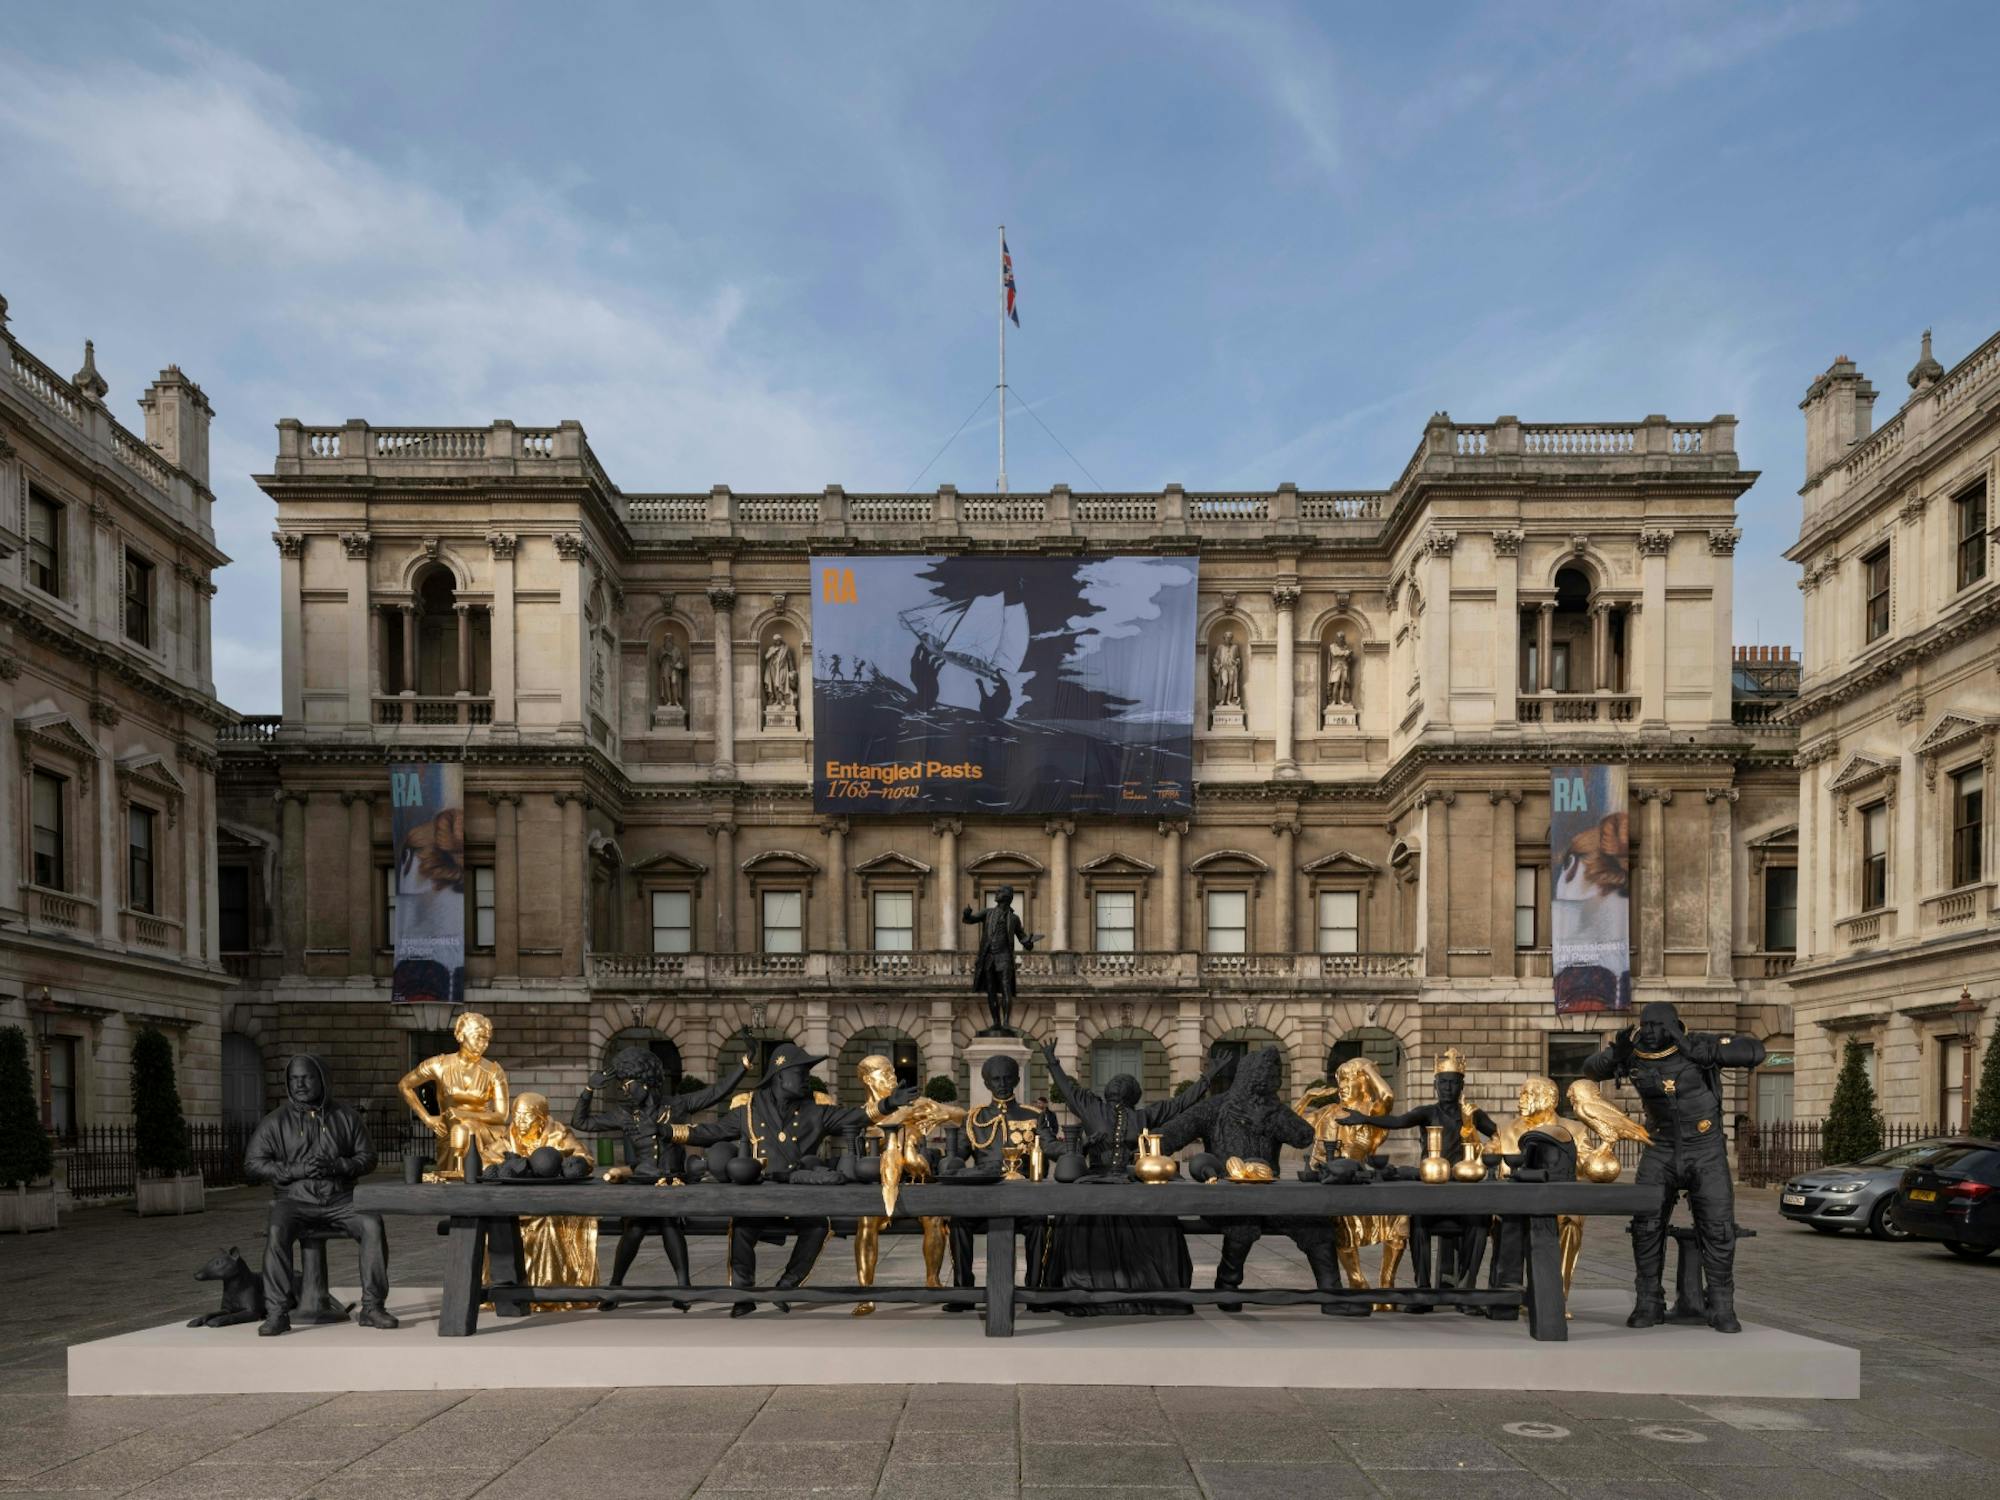 The Interview Colonialism in the spotlight at the RA's new exhibition, Entangled Pasts 